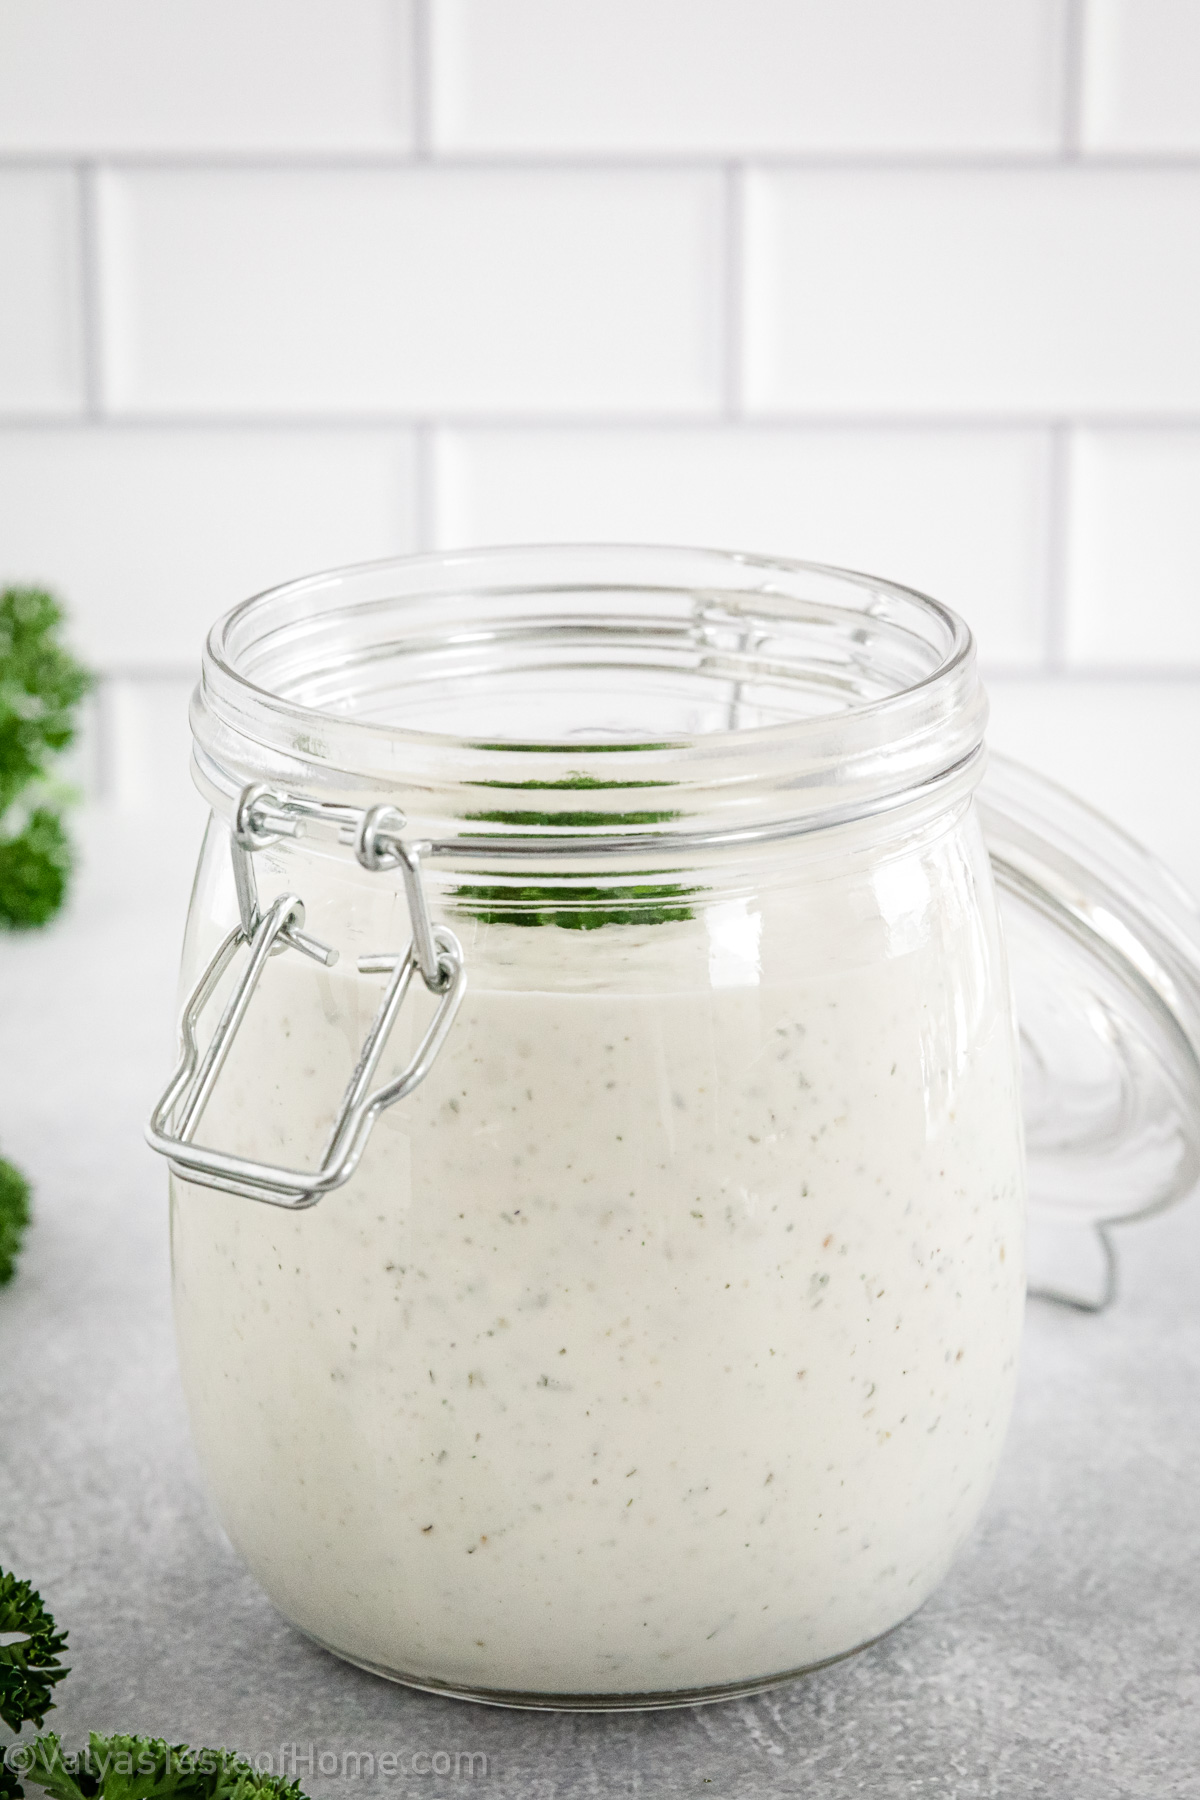 This Ranch Dressing Recipe will give you a delicious homemade salad dressing that's creamy, tangy, and has that classic ranch dressing flavor that you'll love!